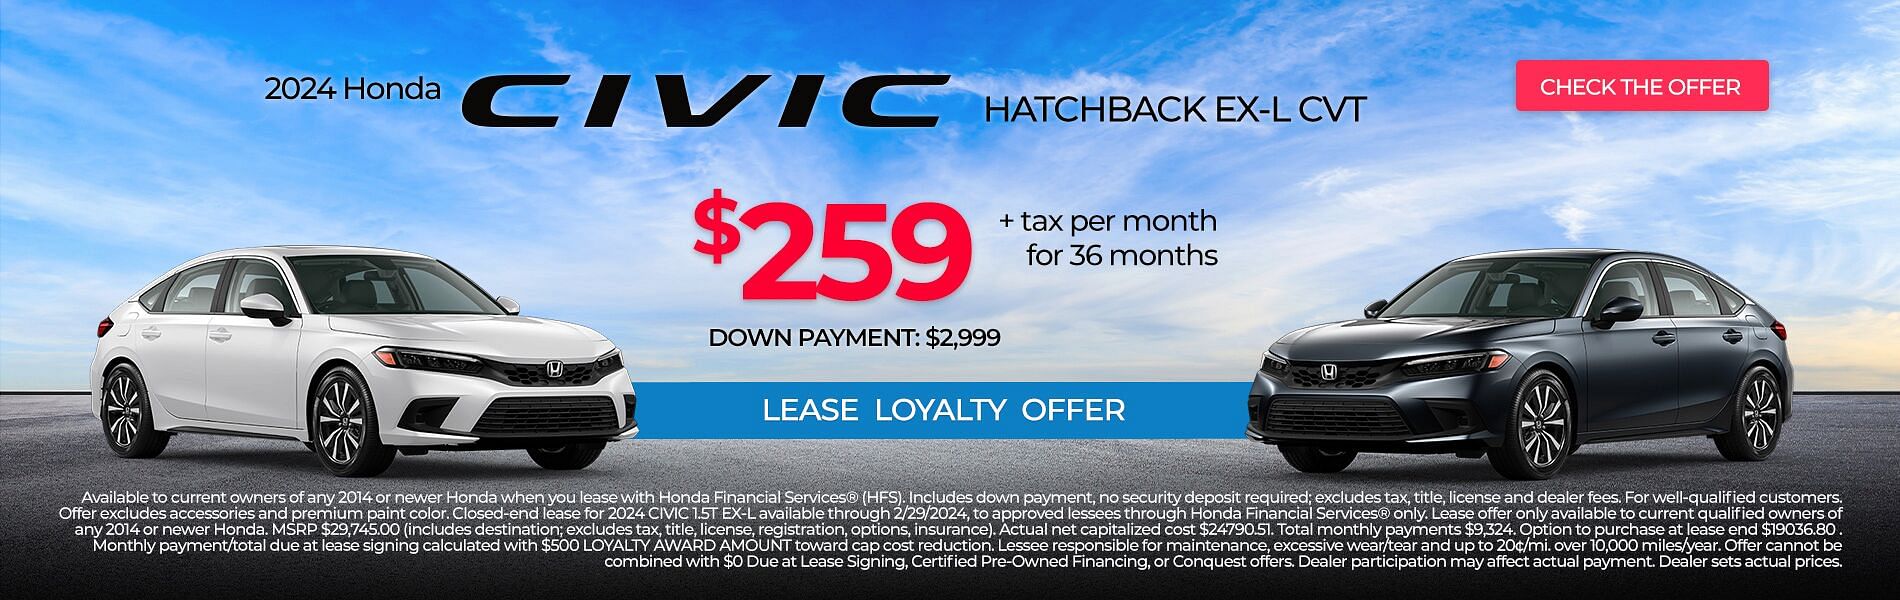 2024 Civic Hatchback Lease Special $259